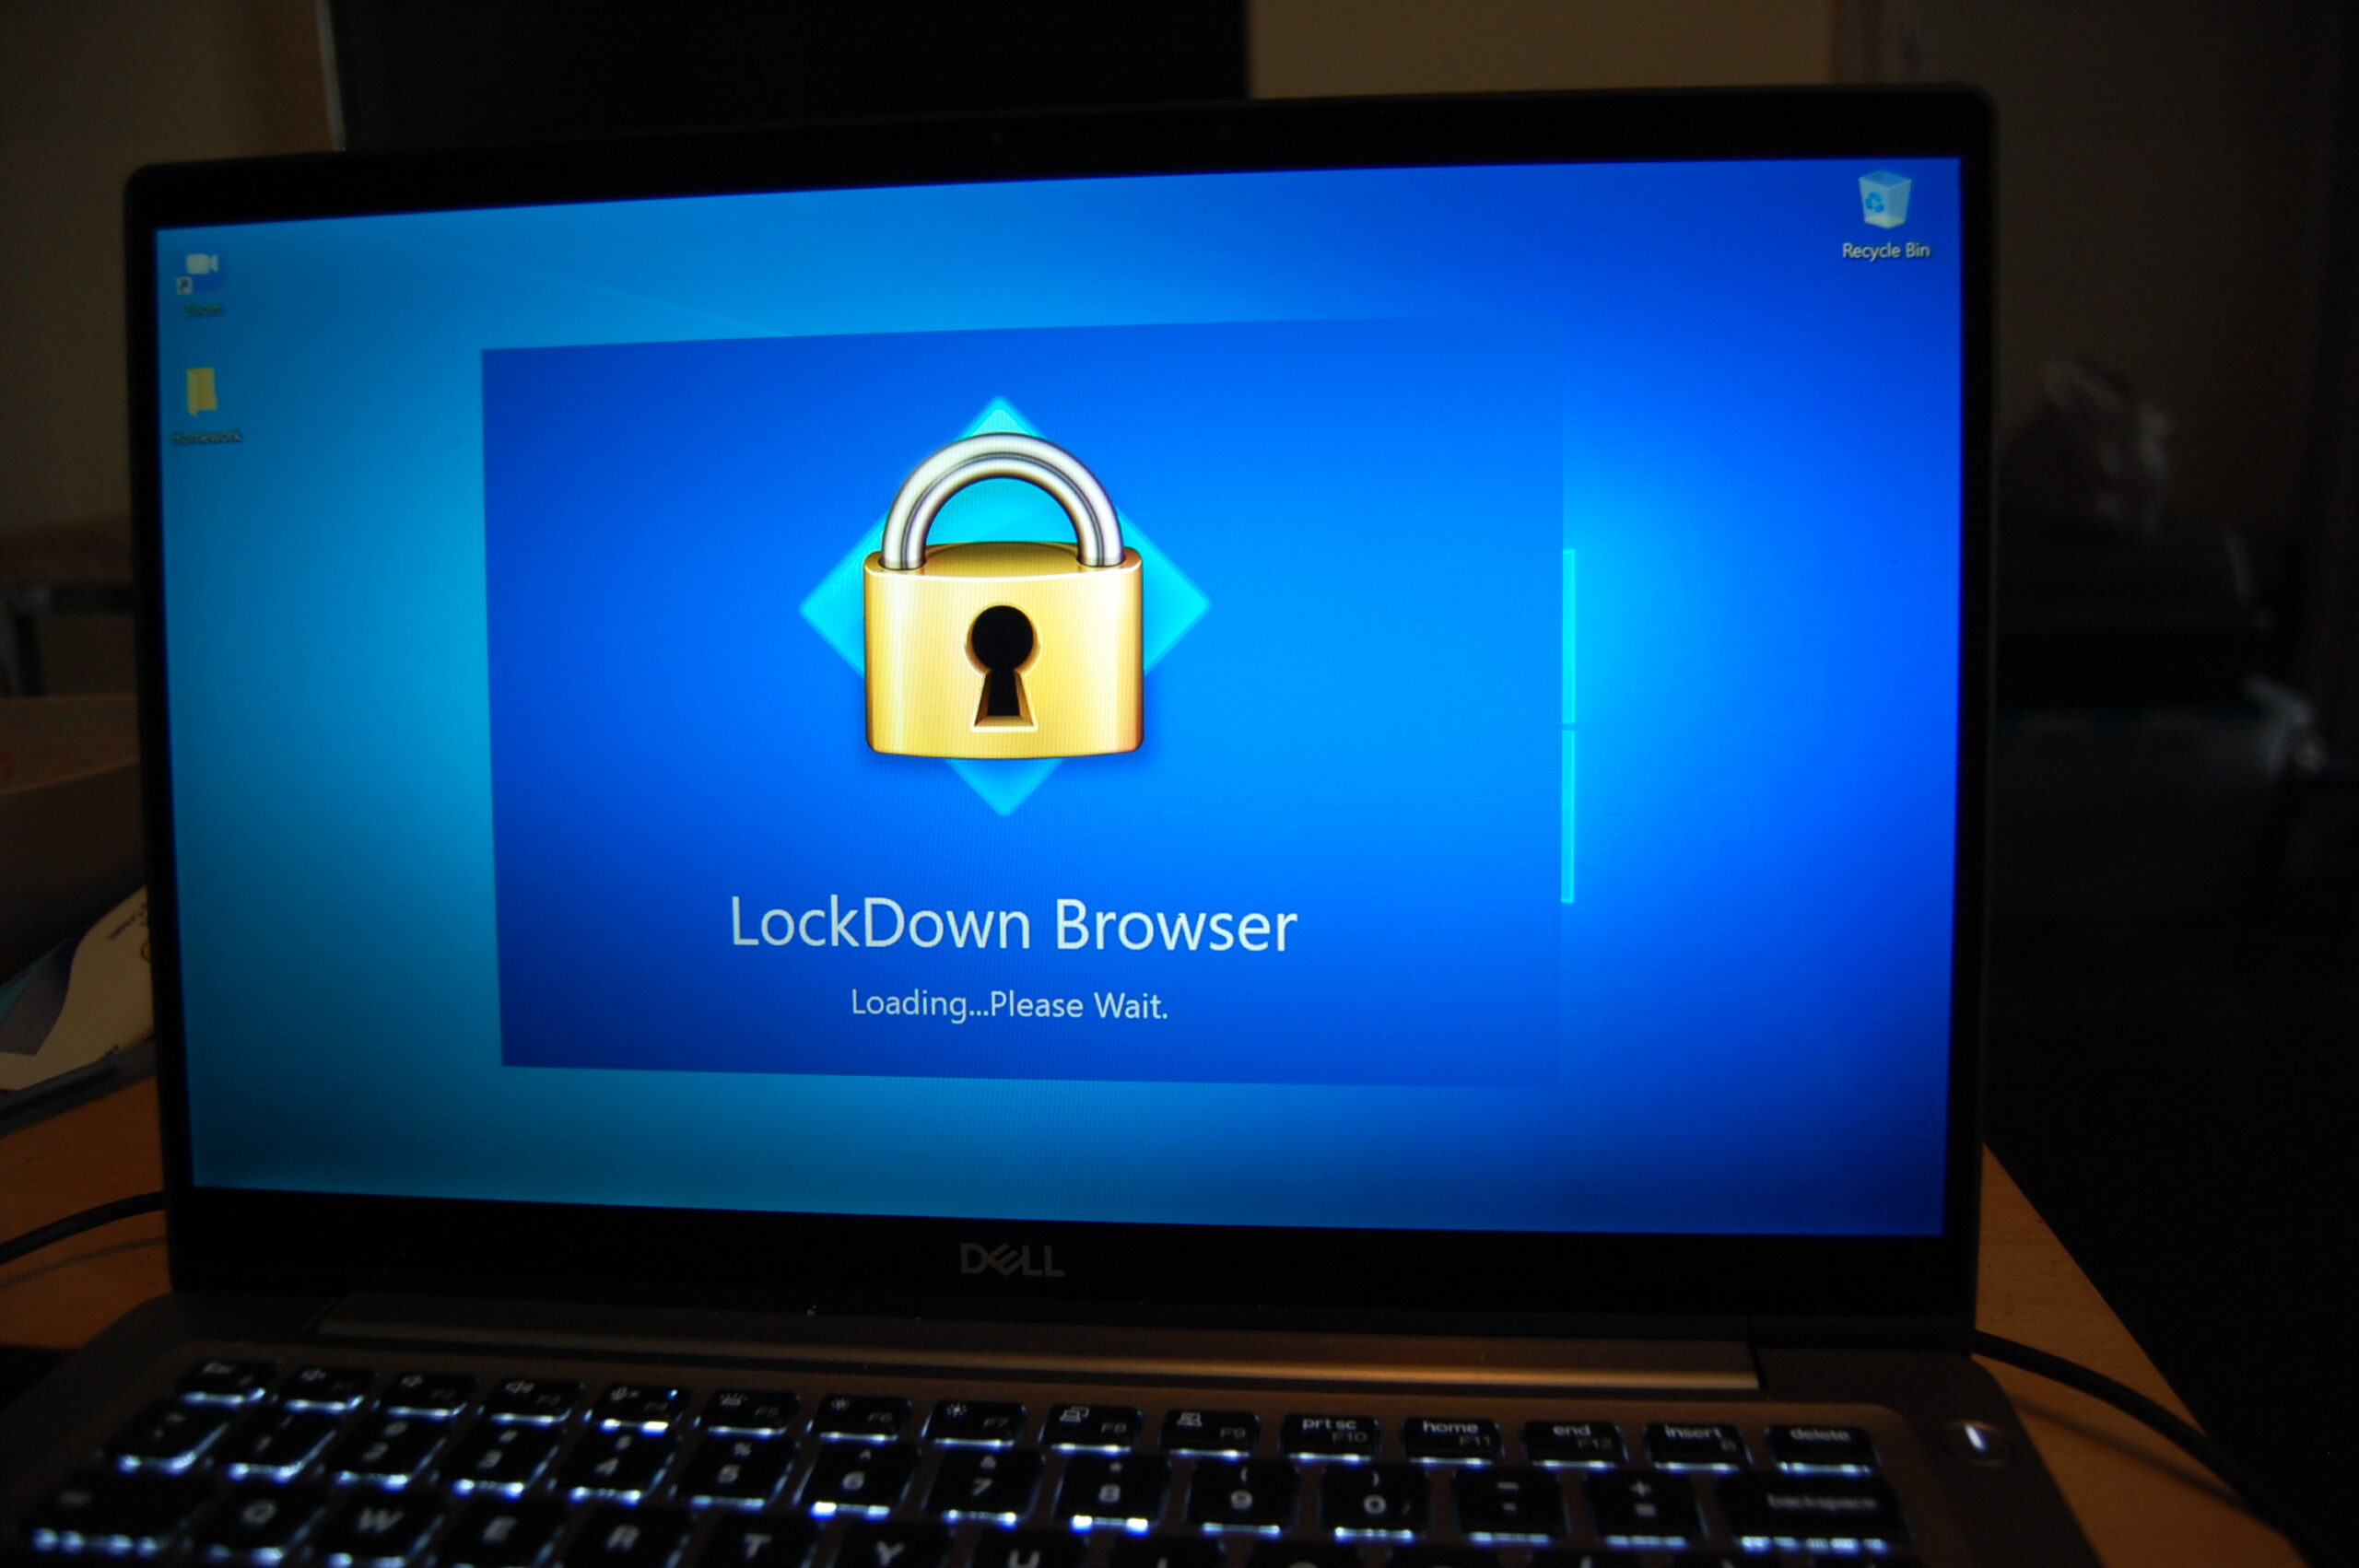 Lockdown Browser is bad software and should be scrapped